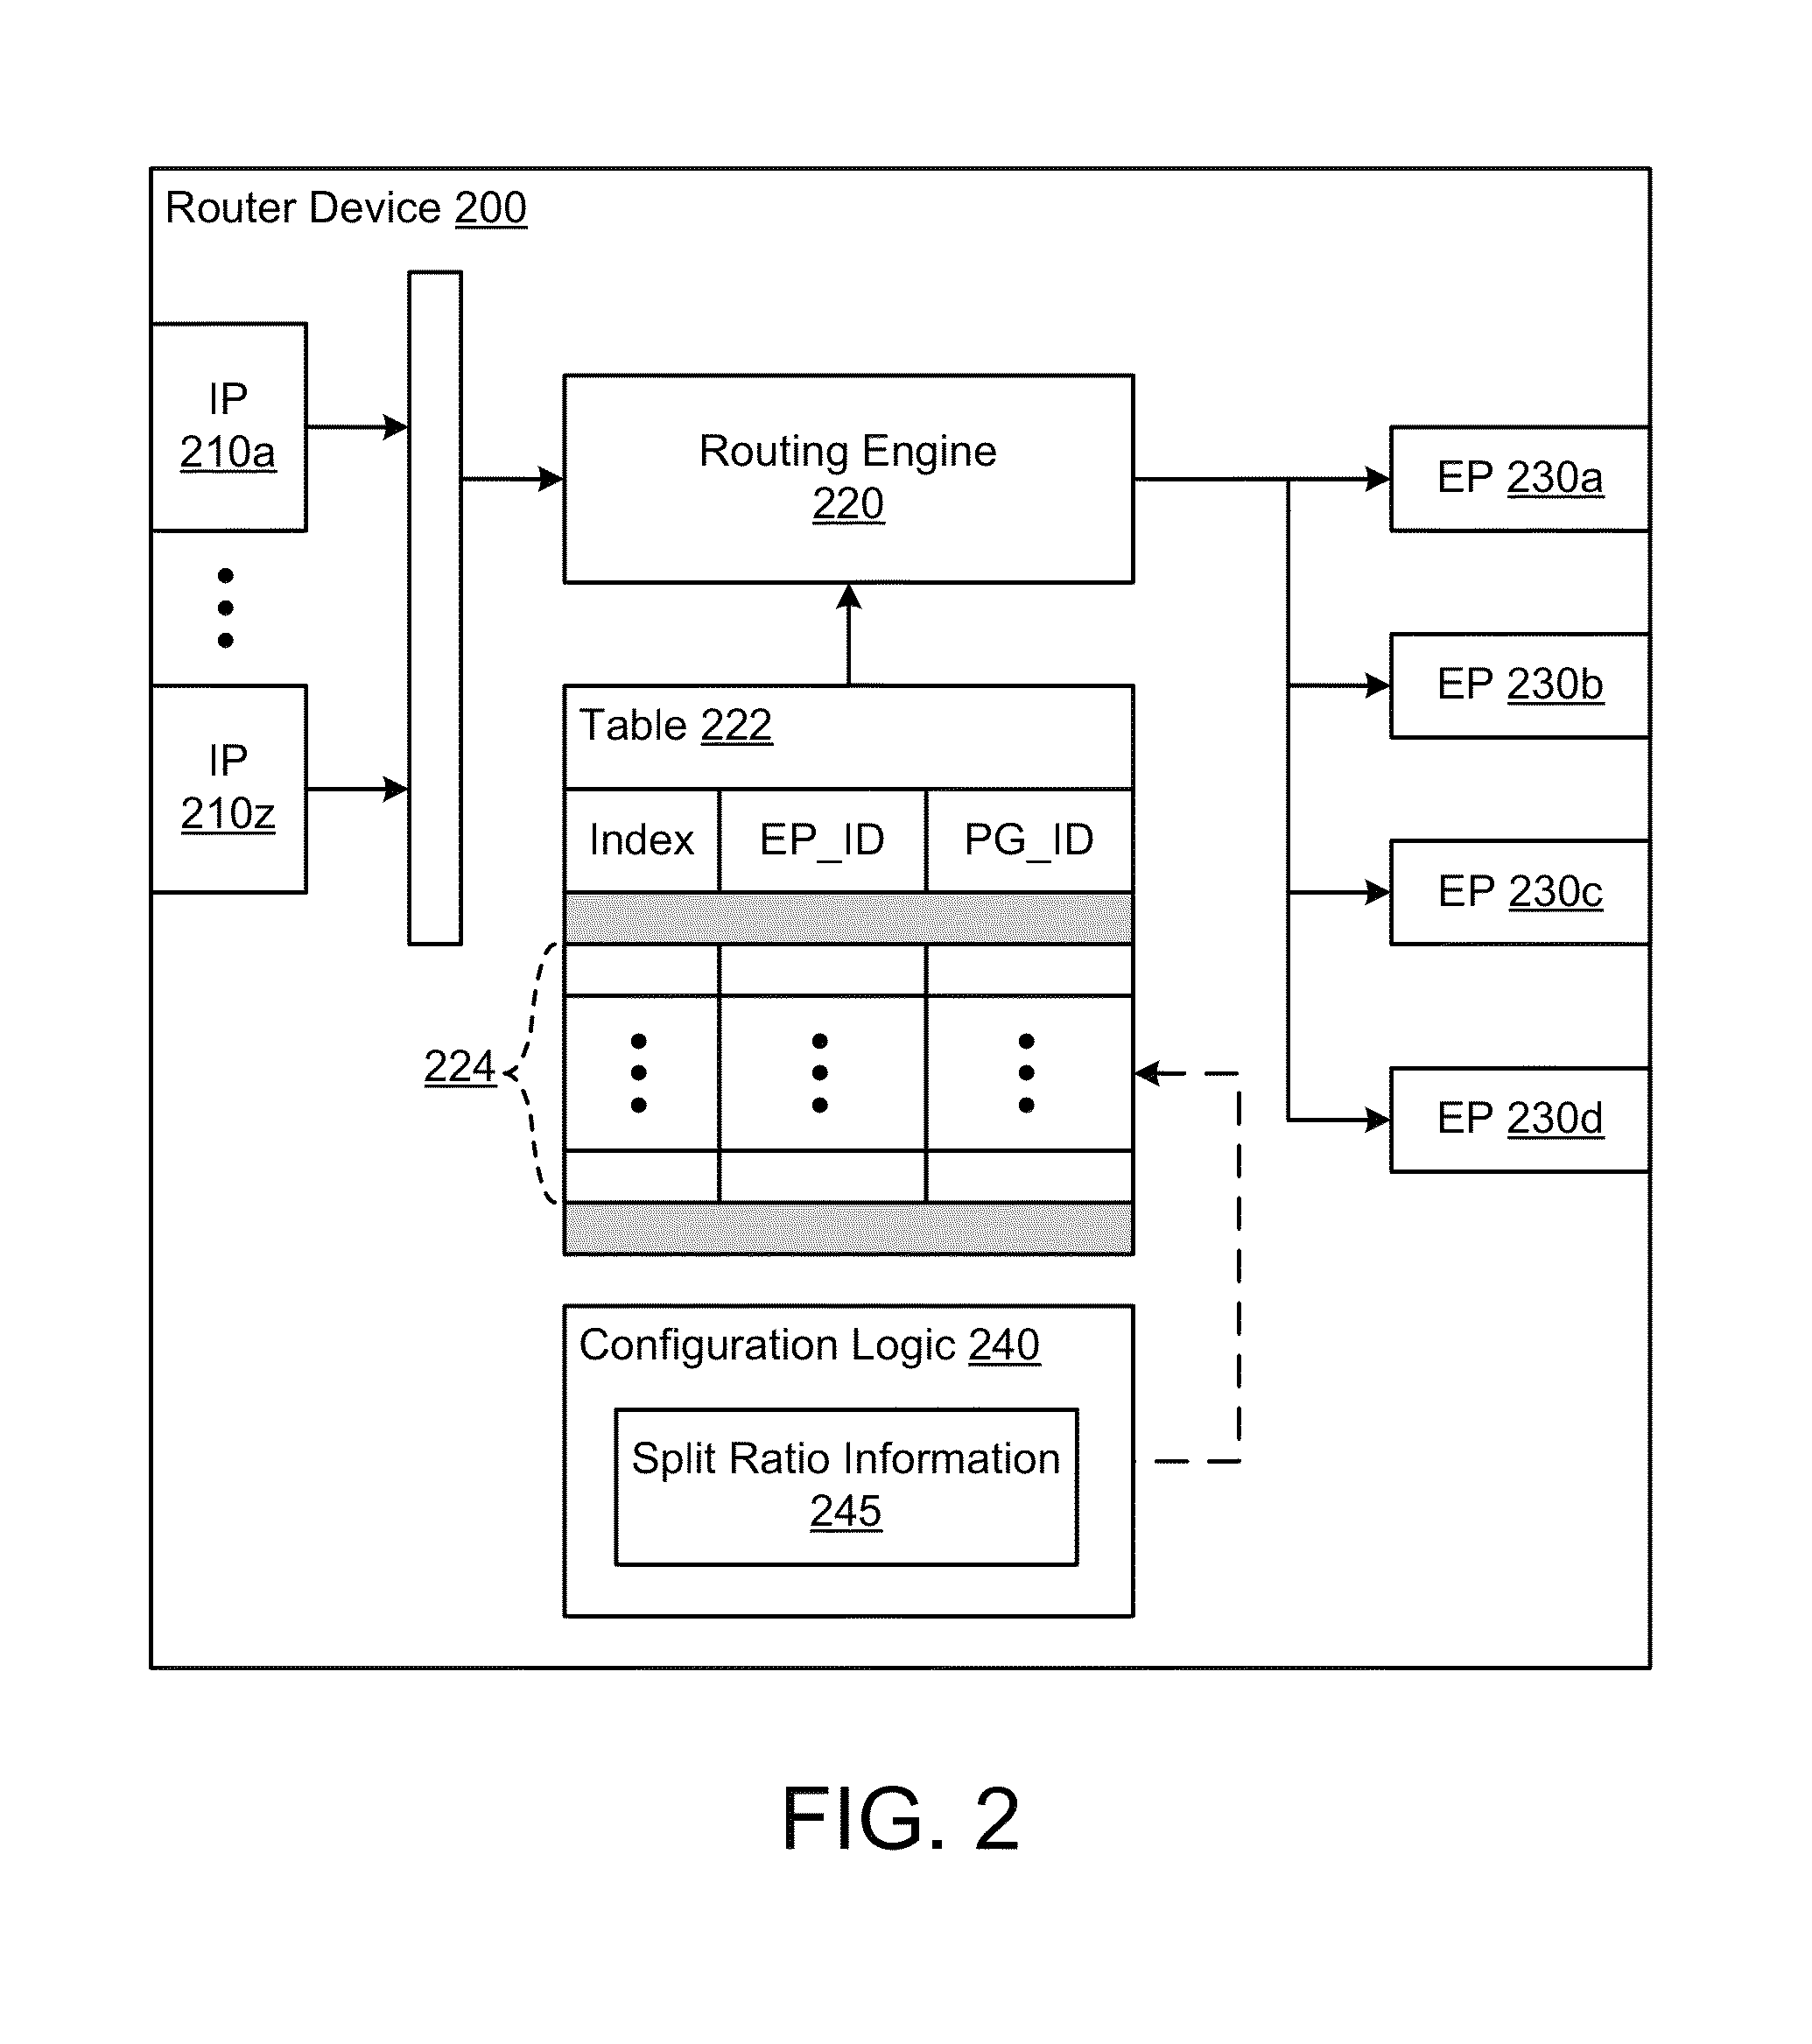 Providing routing information to support routing by port groups via corresponding network paths